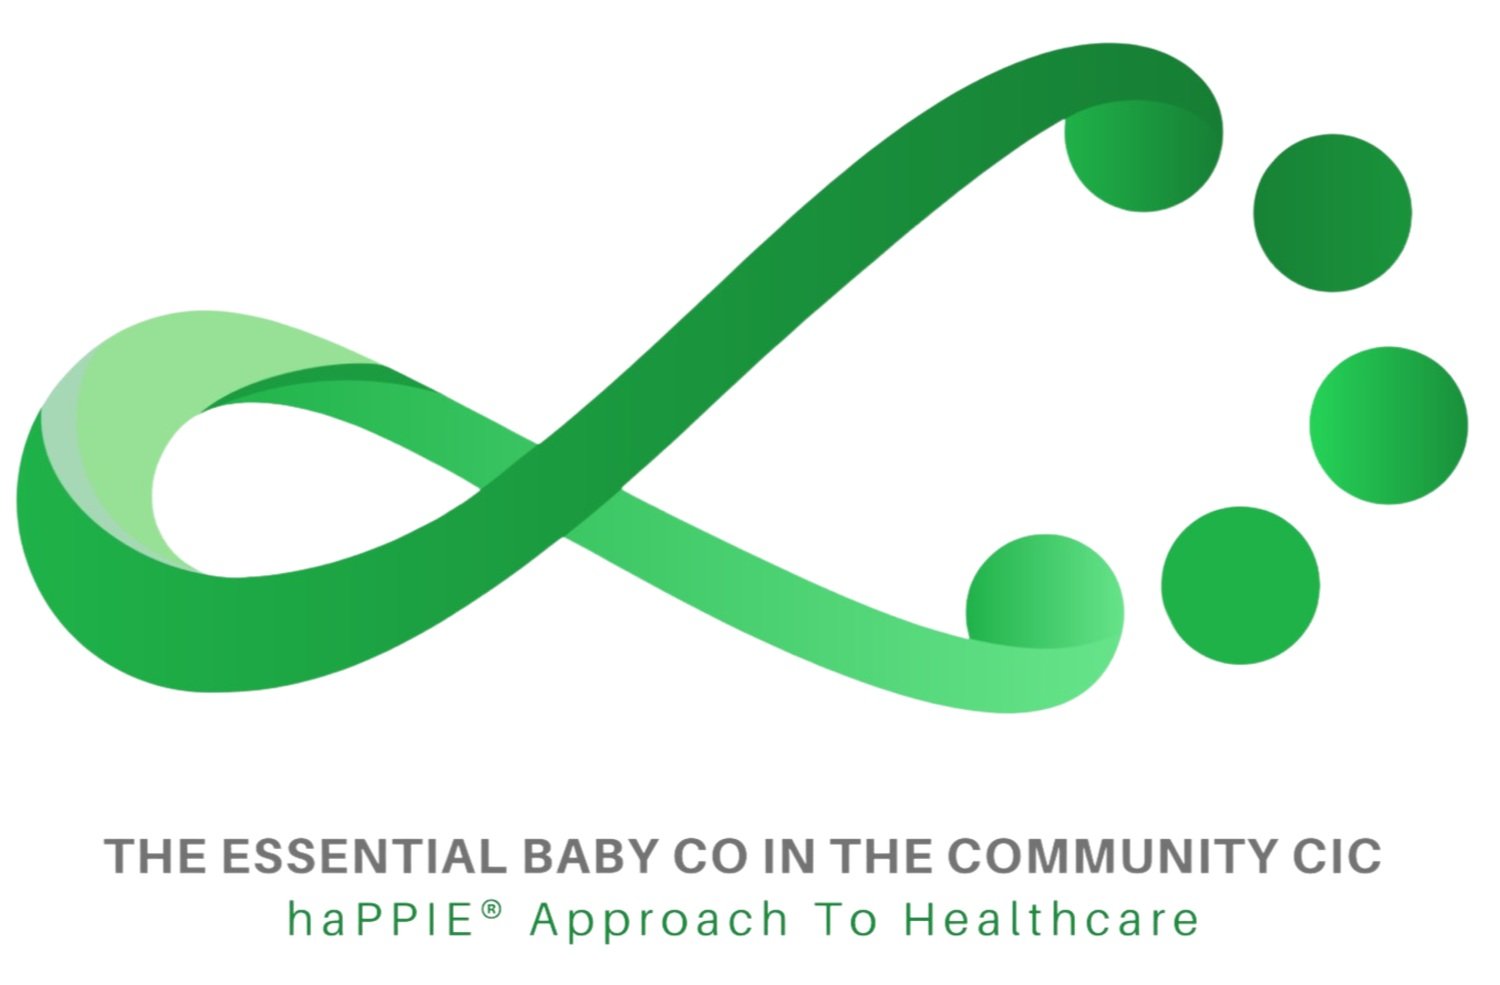 THE ESSENTIAL BABY CO IN THE COMMUNITY CIC